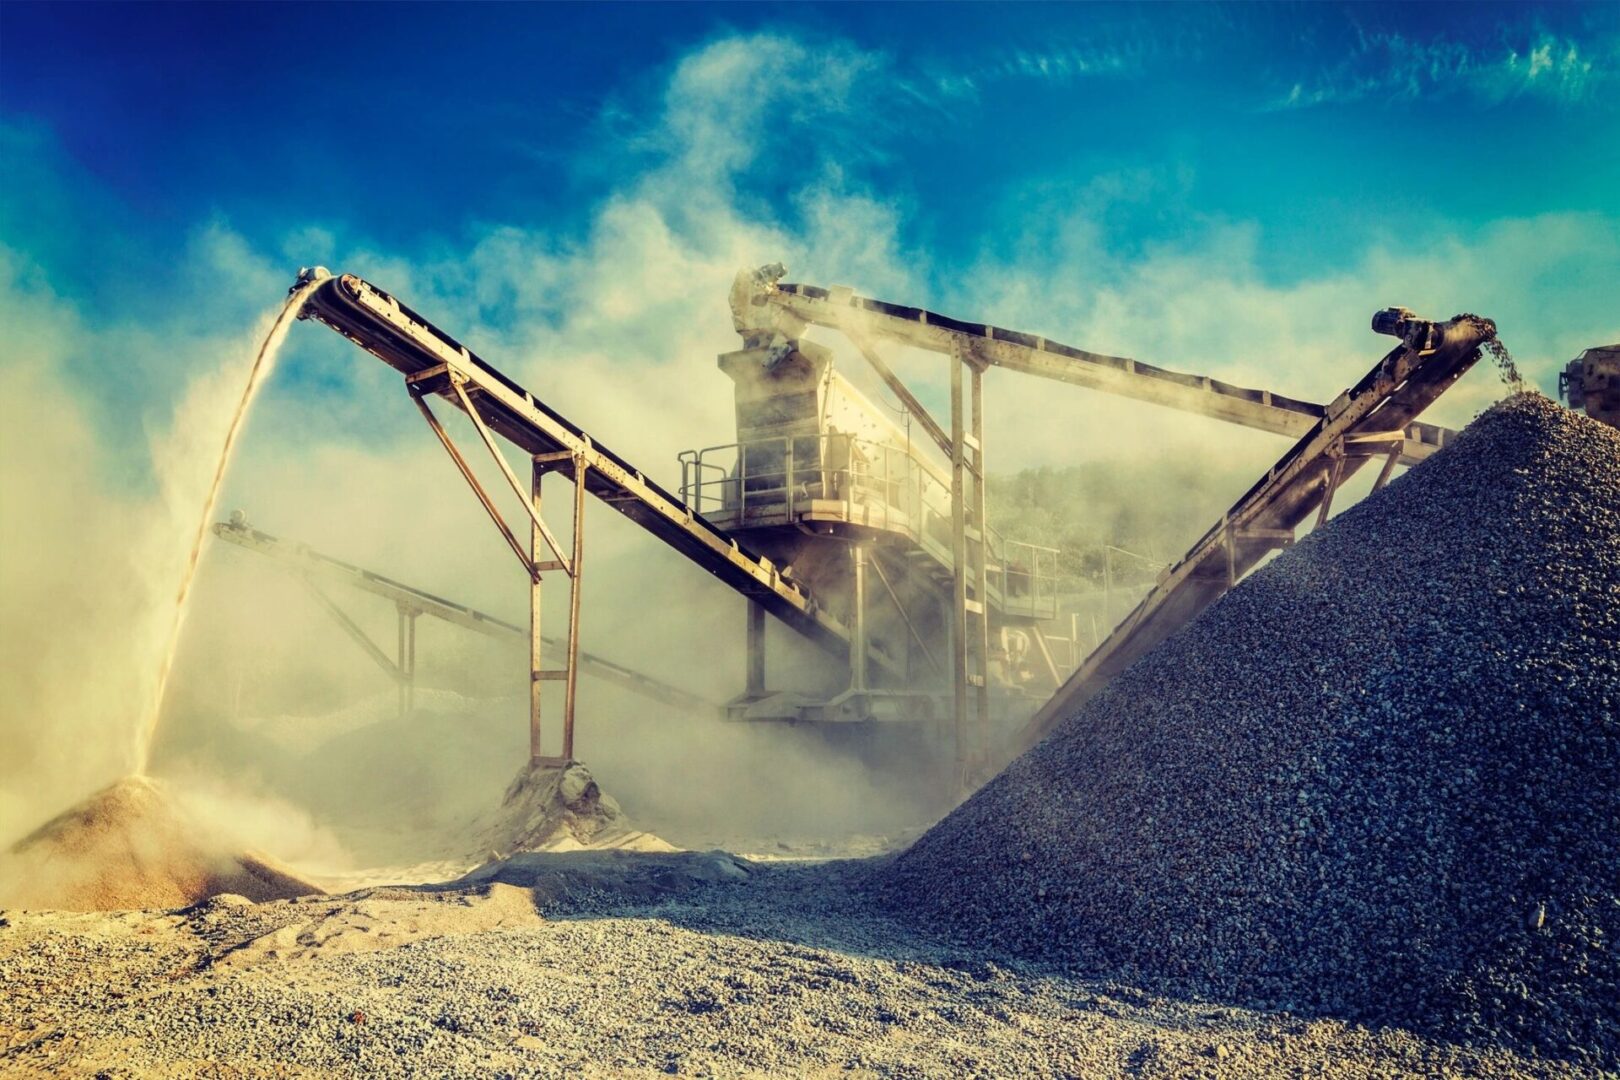 A large pile of gravel next to a conveyor belt.